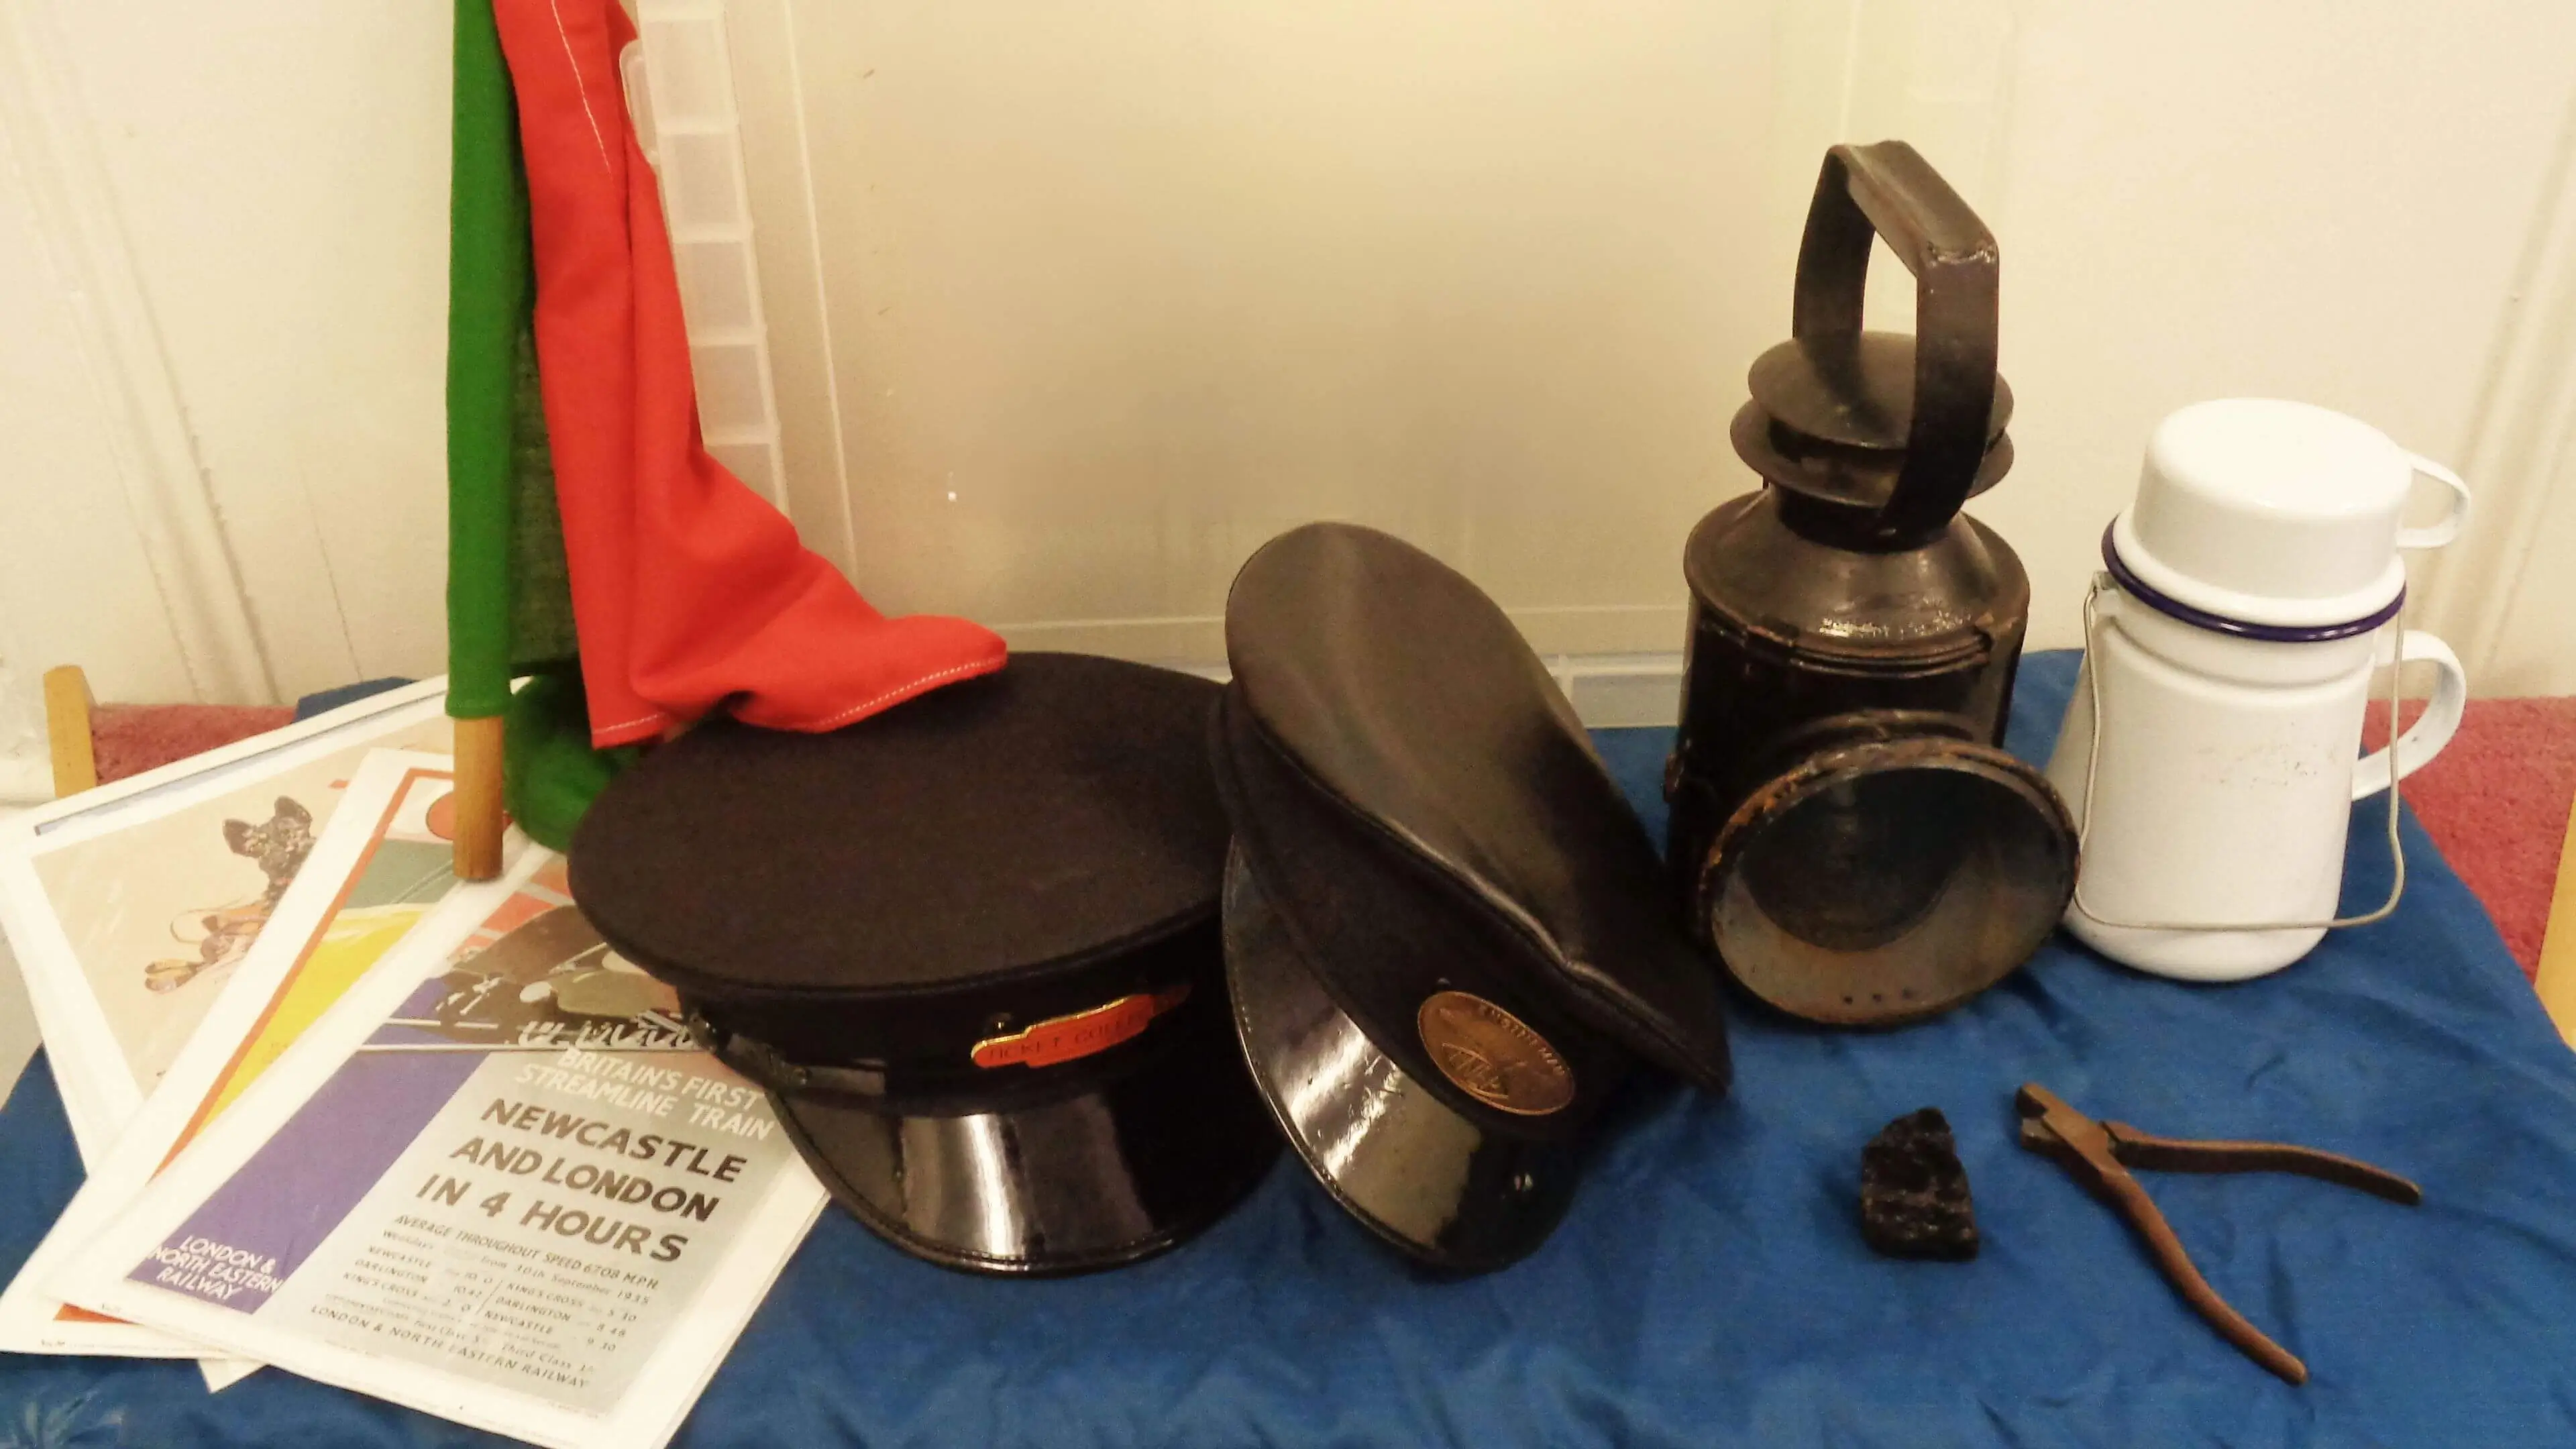 Old railway artefacts including a hat, newspapers and lamps